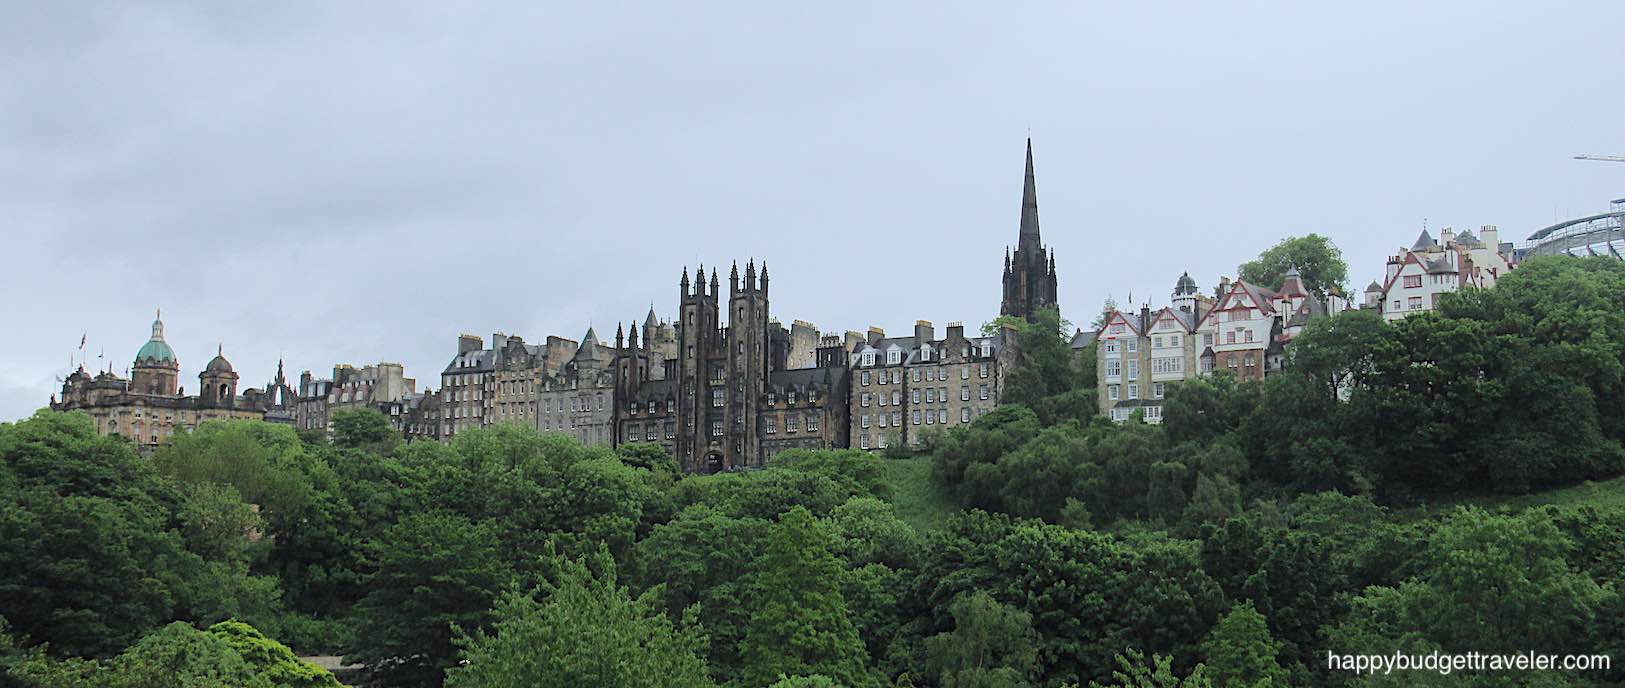 Picture of View of the Old Town of Edinburgh over the Princes Garden treetops